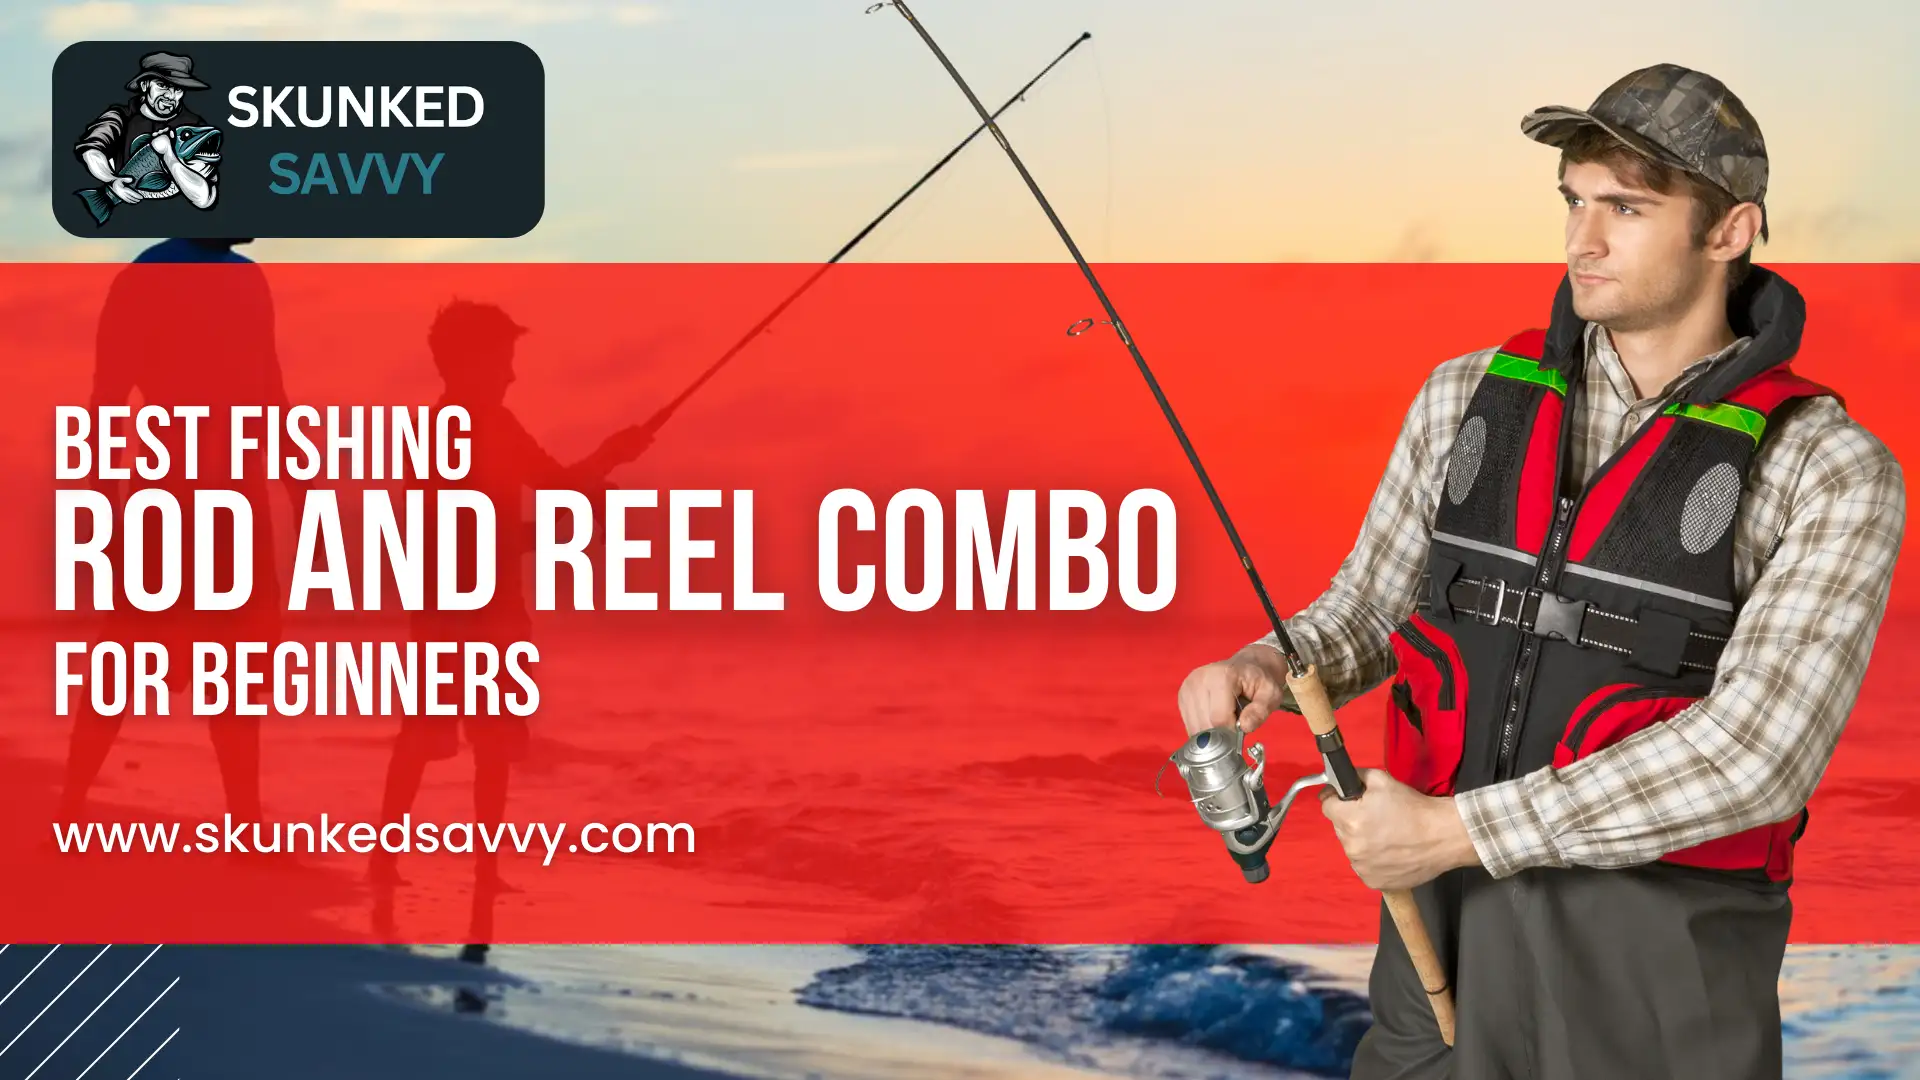 Best Fishing Rod And Reel Combo for Beginners